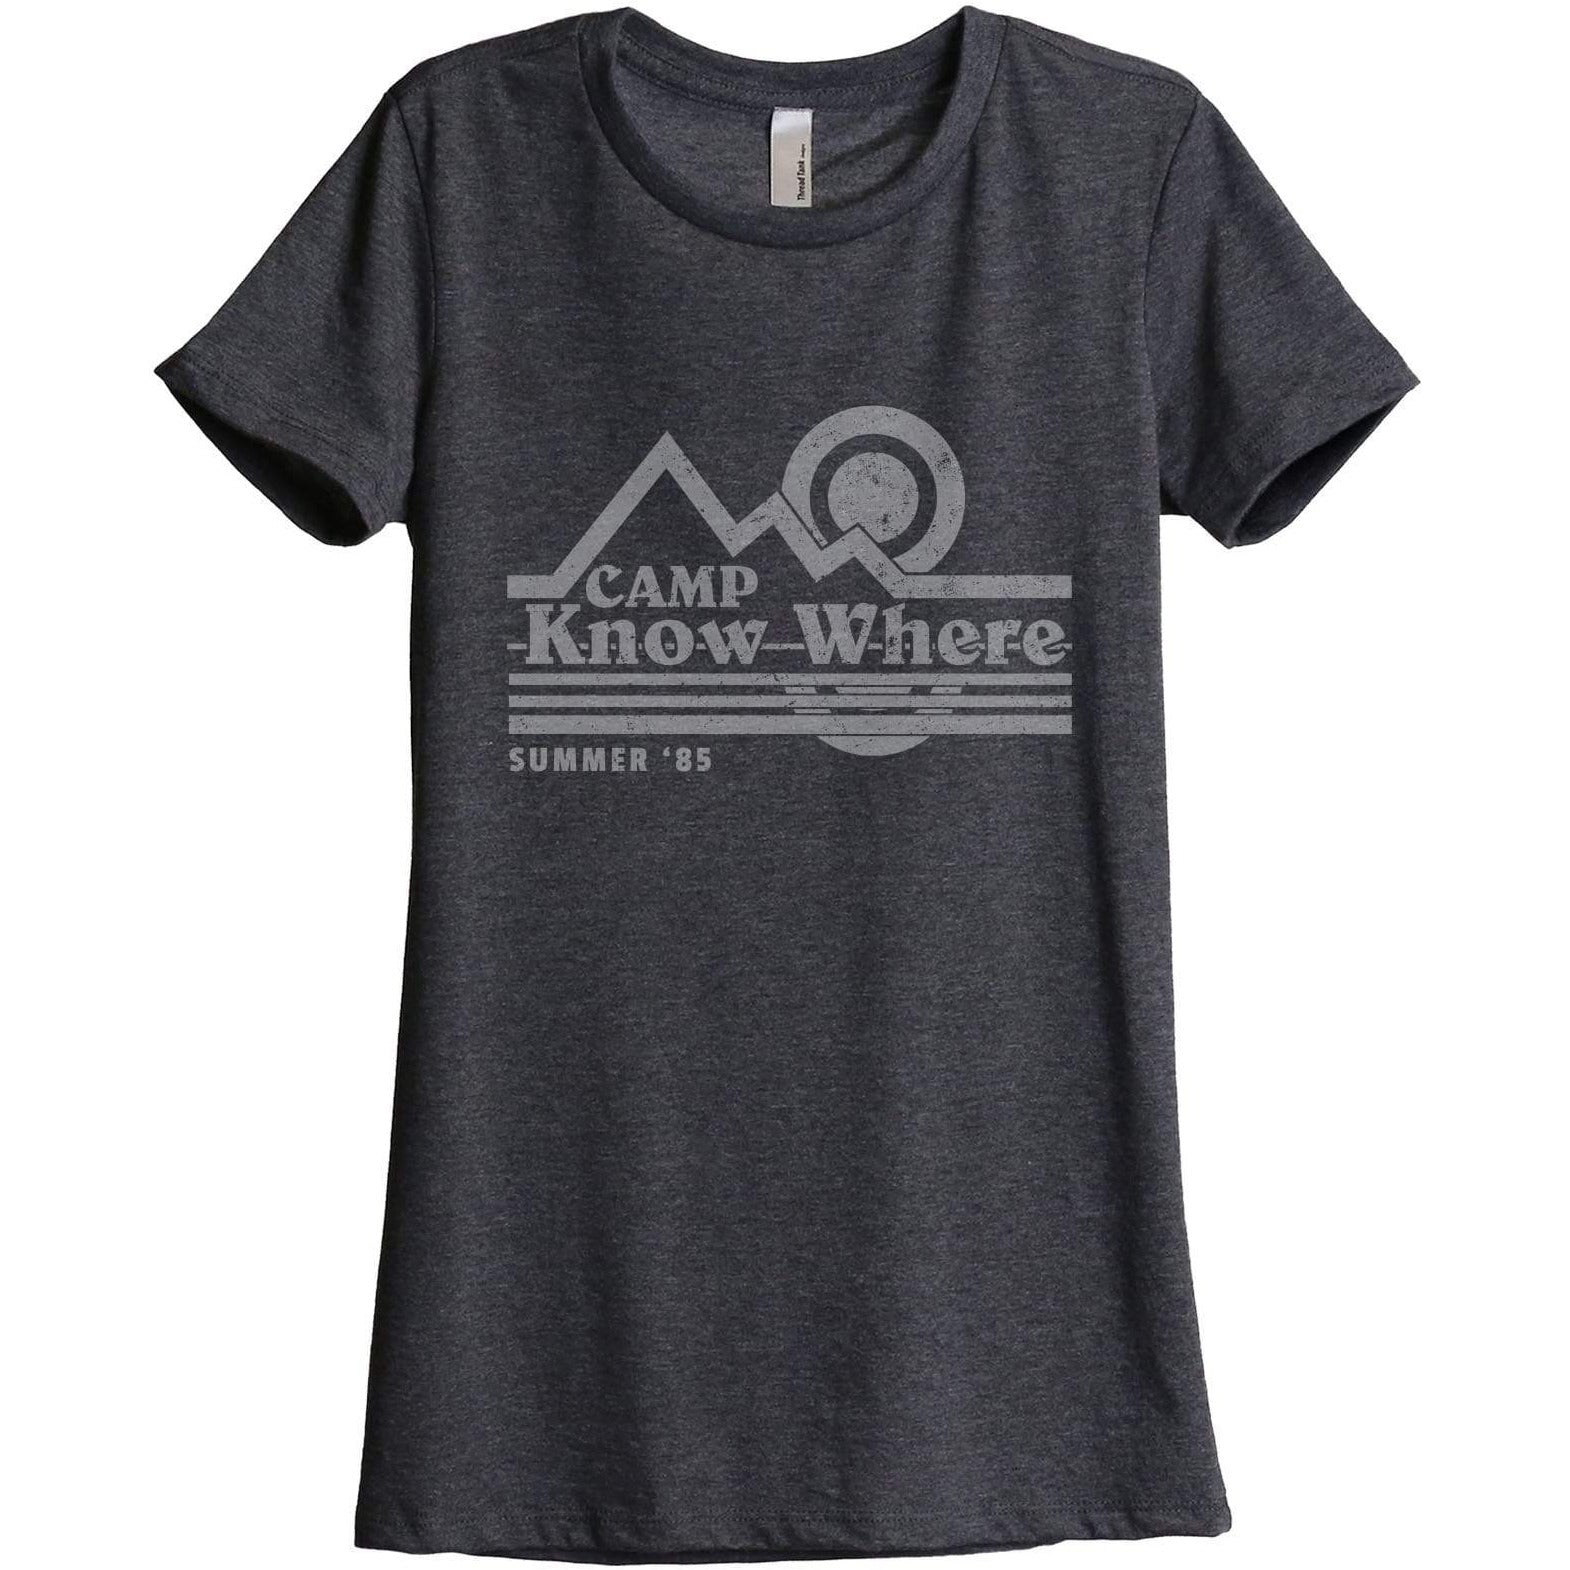 Camp Know Where - Thread Tank | Stories You Can Wear | T-Shirts, Tank Tops and Sweatshirts